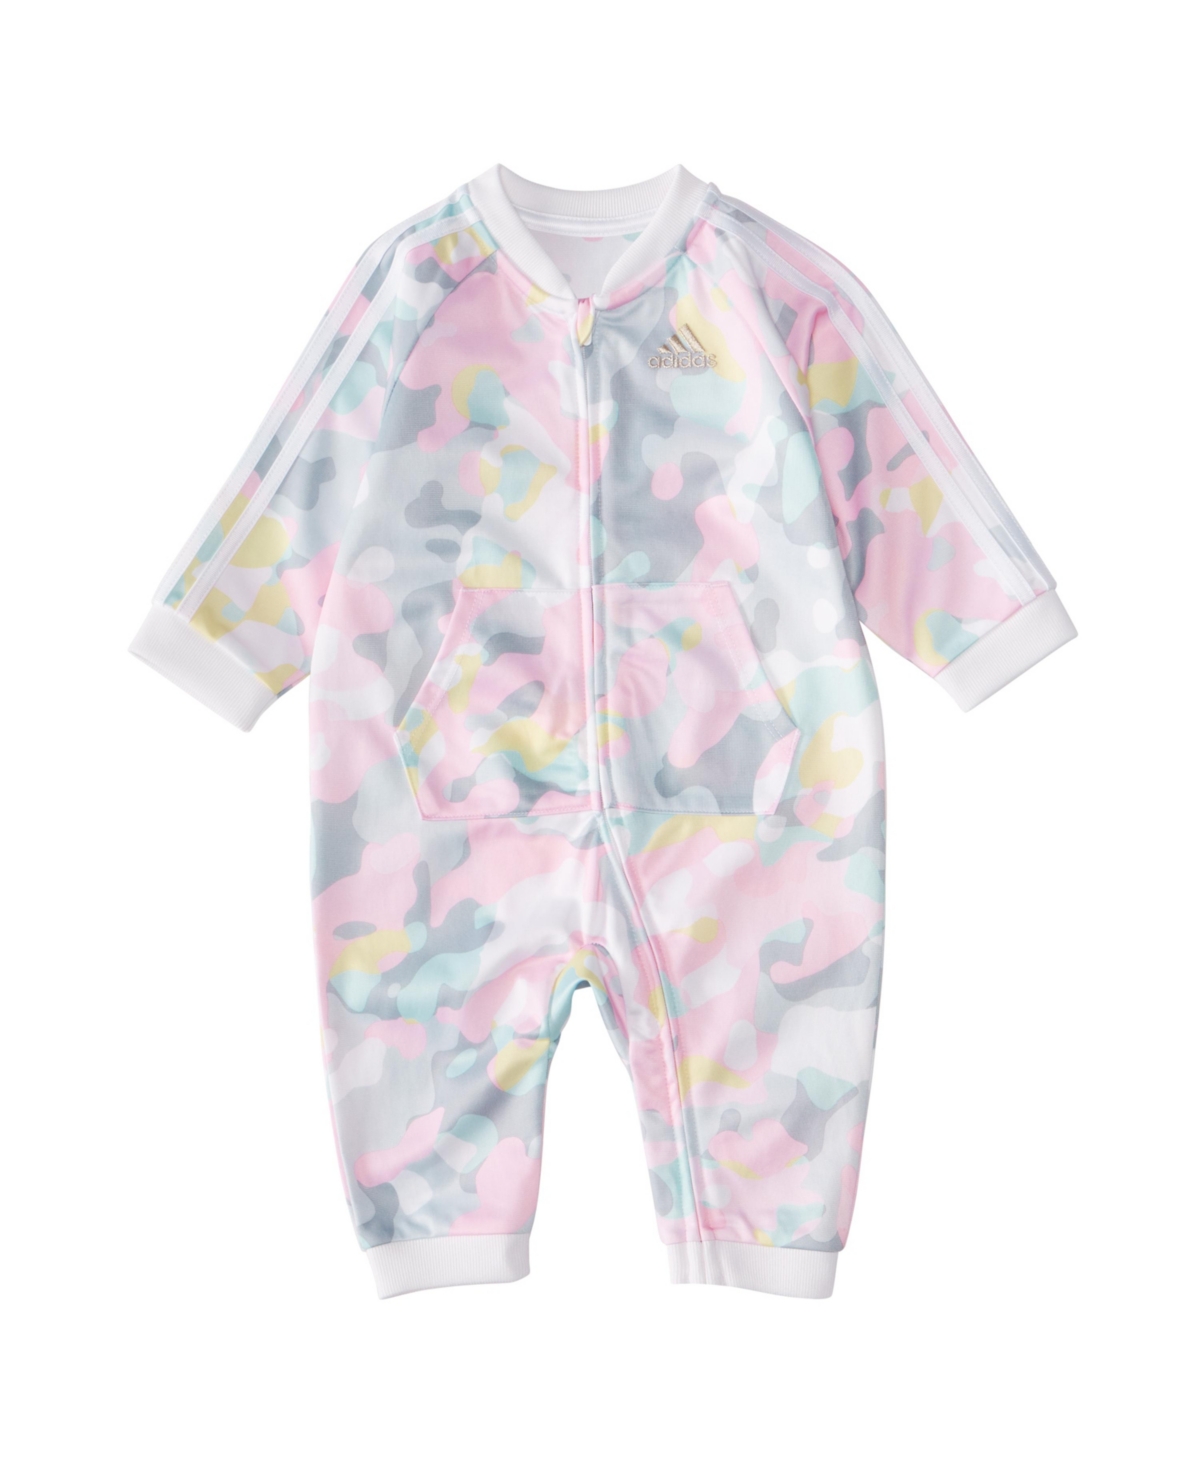 adidas Baby Girls Long Sleeve Camo Print Tricot Coveralls